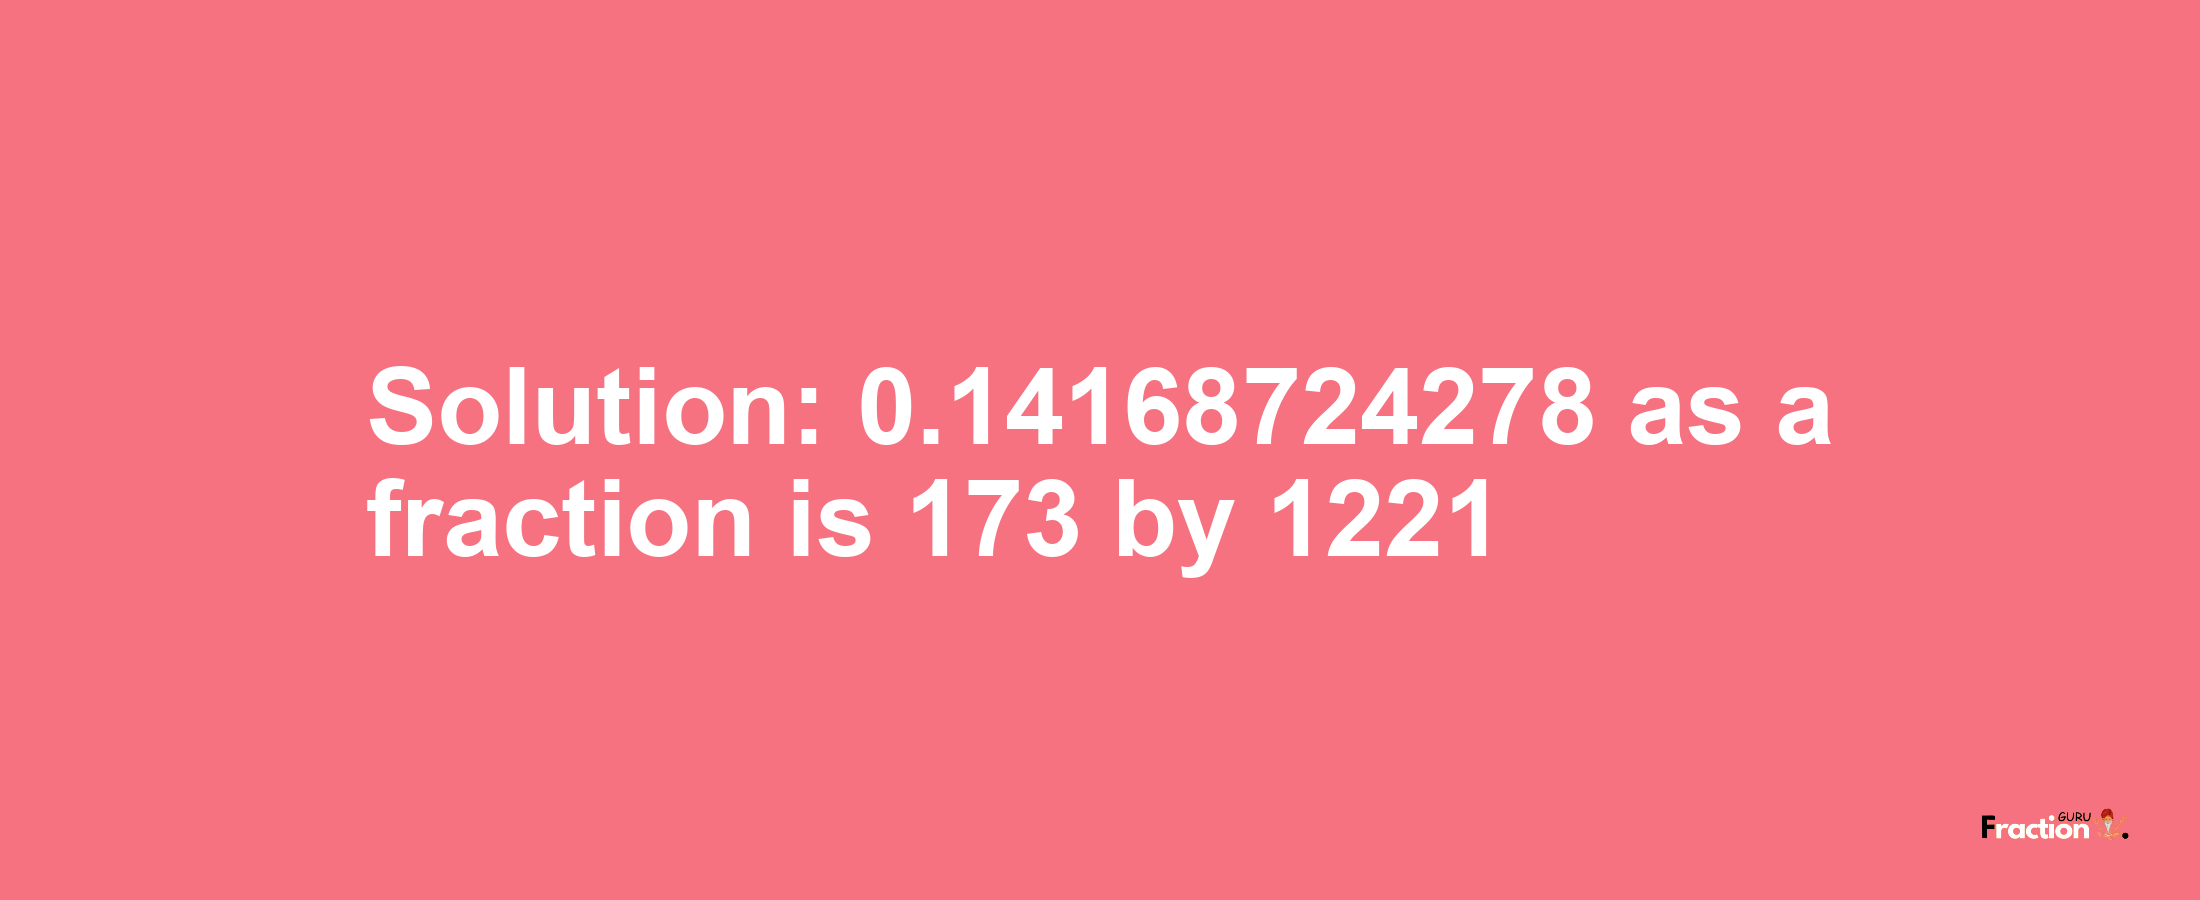 Solution:0.14168724278 as a fraction is 173/1221